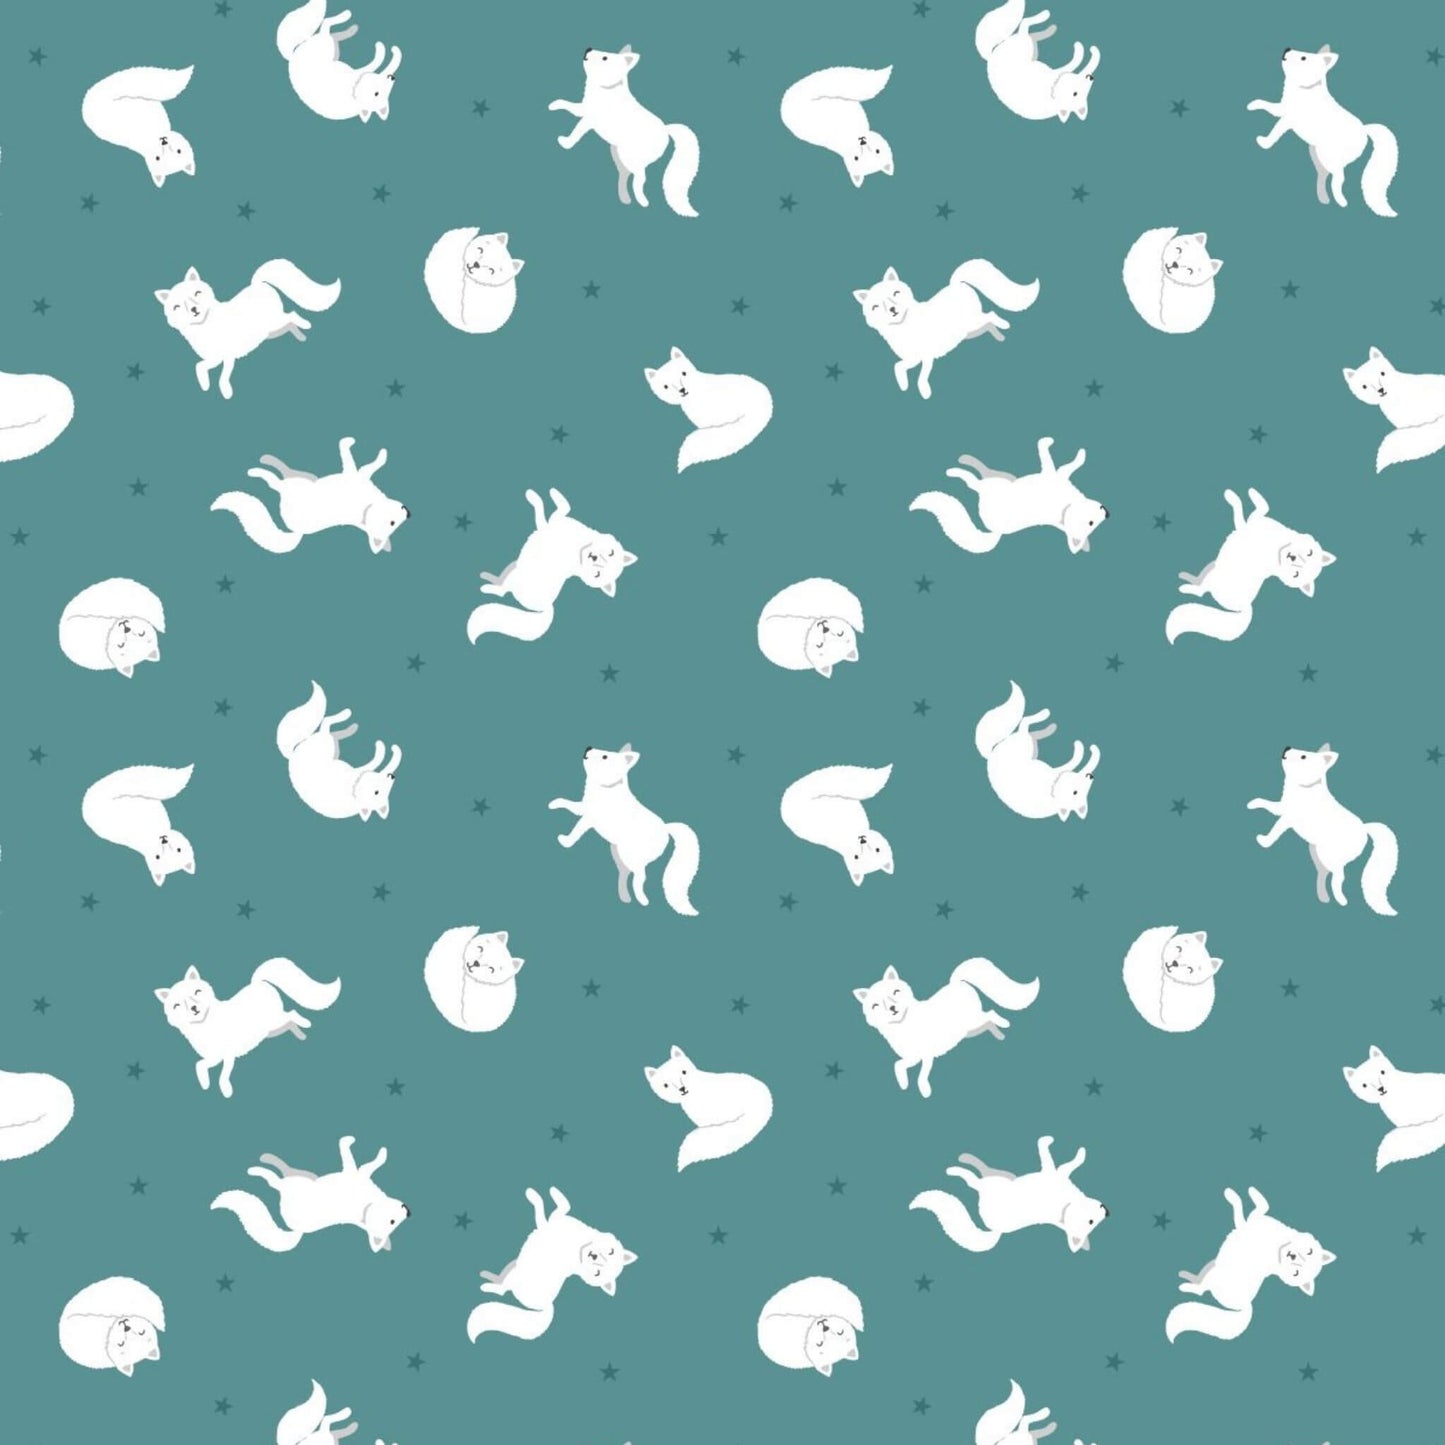 Artic Fox - Small Things Polar Animals Fabric Range - Lewis and Irene - Iced Teal